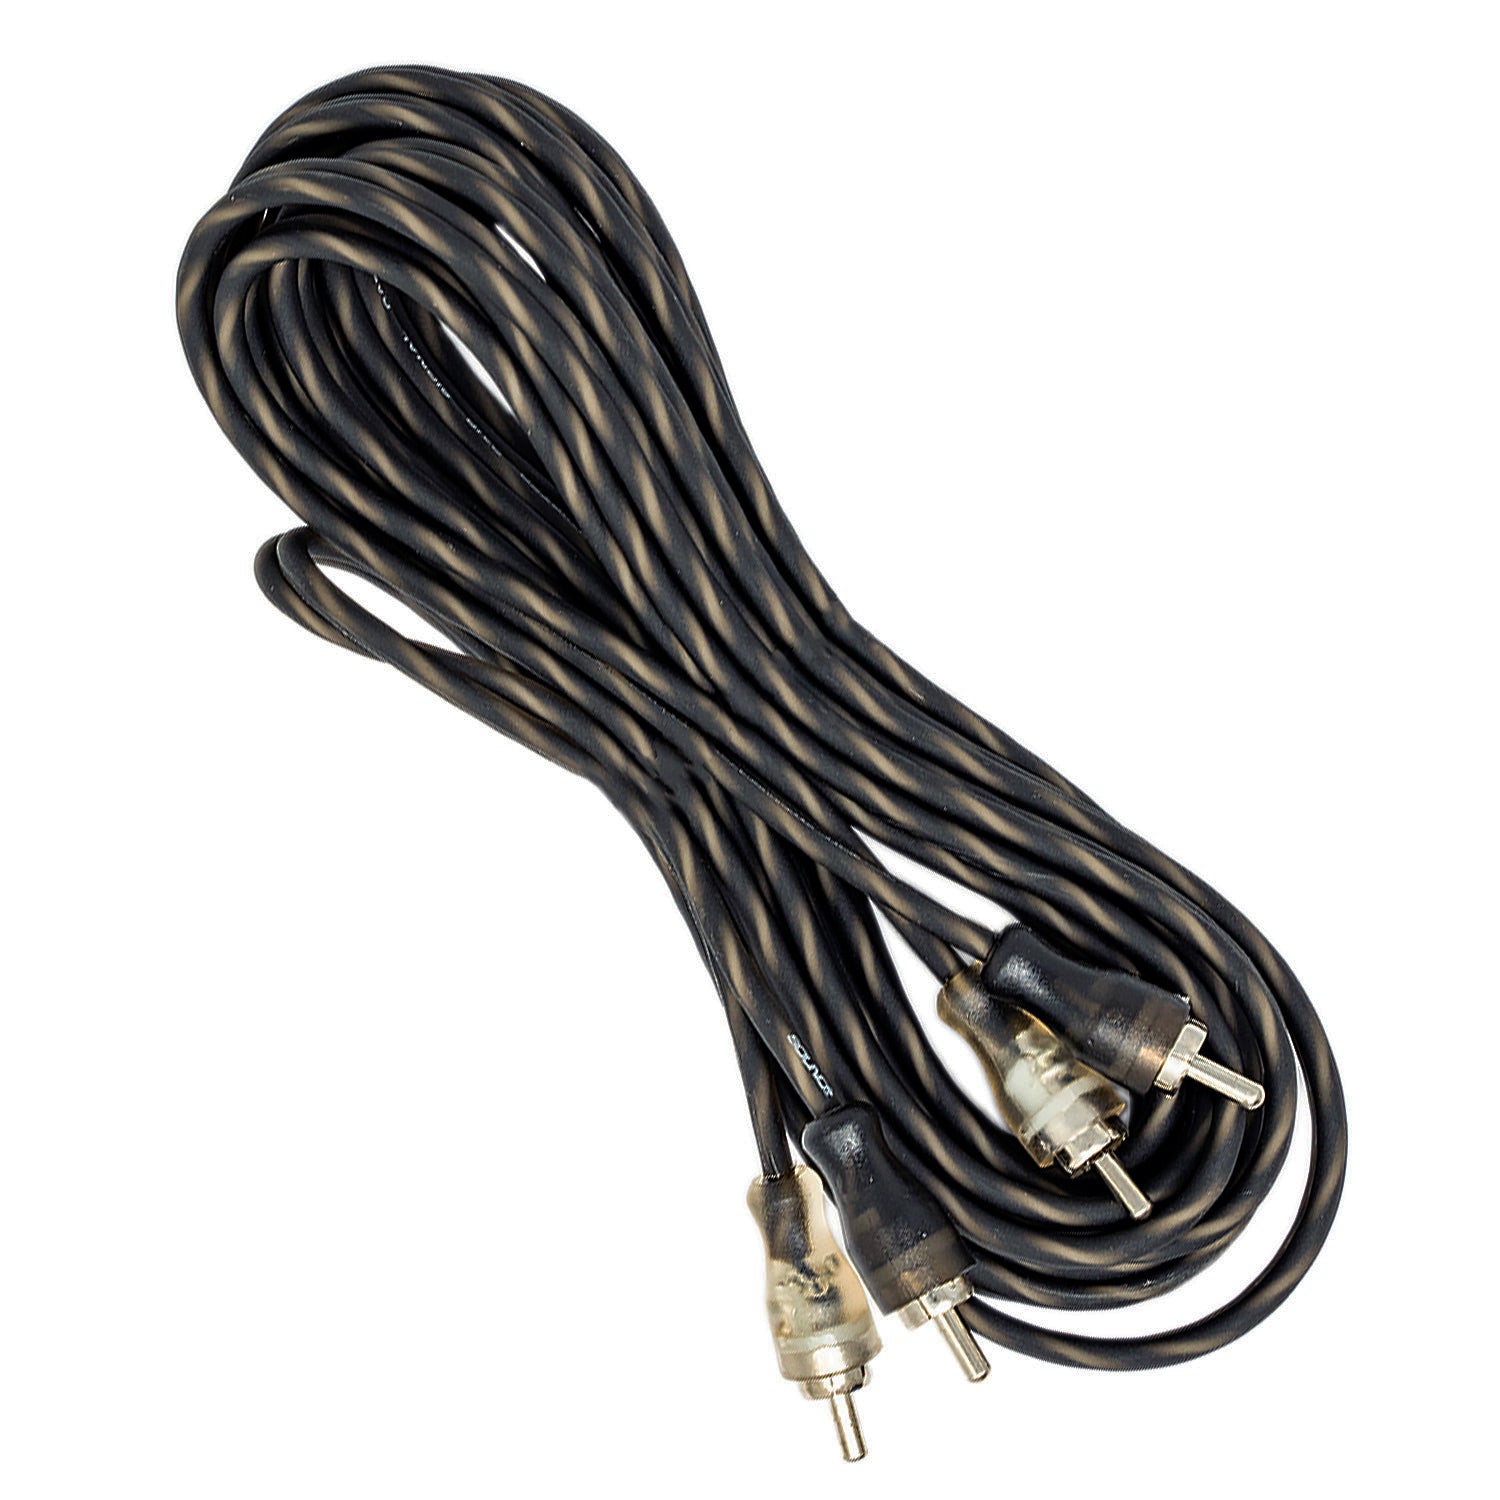 SoundBox LC-T15, Twisted Pair RCA Interconnect Cable, 15 Ft. - (Polybag Packaging)